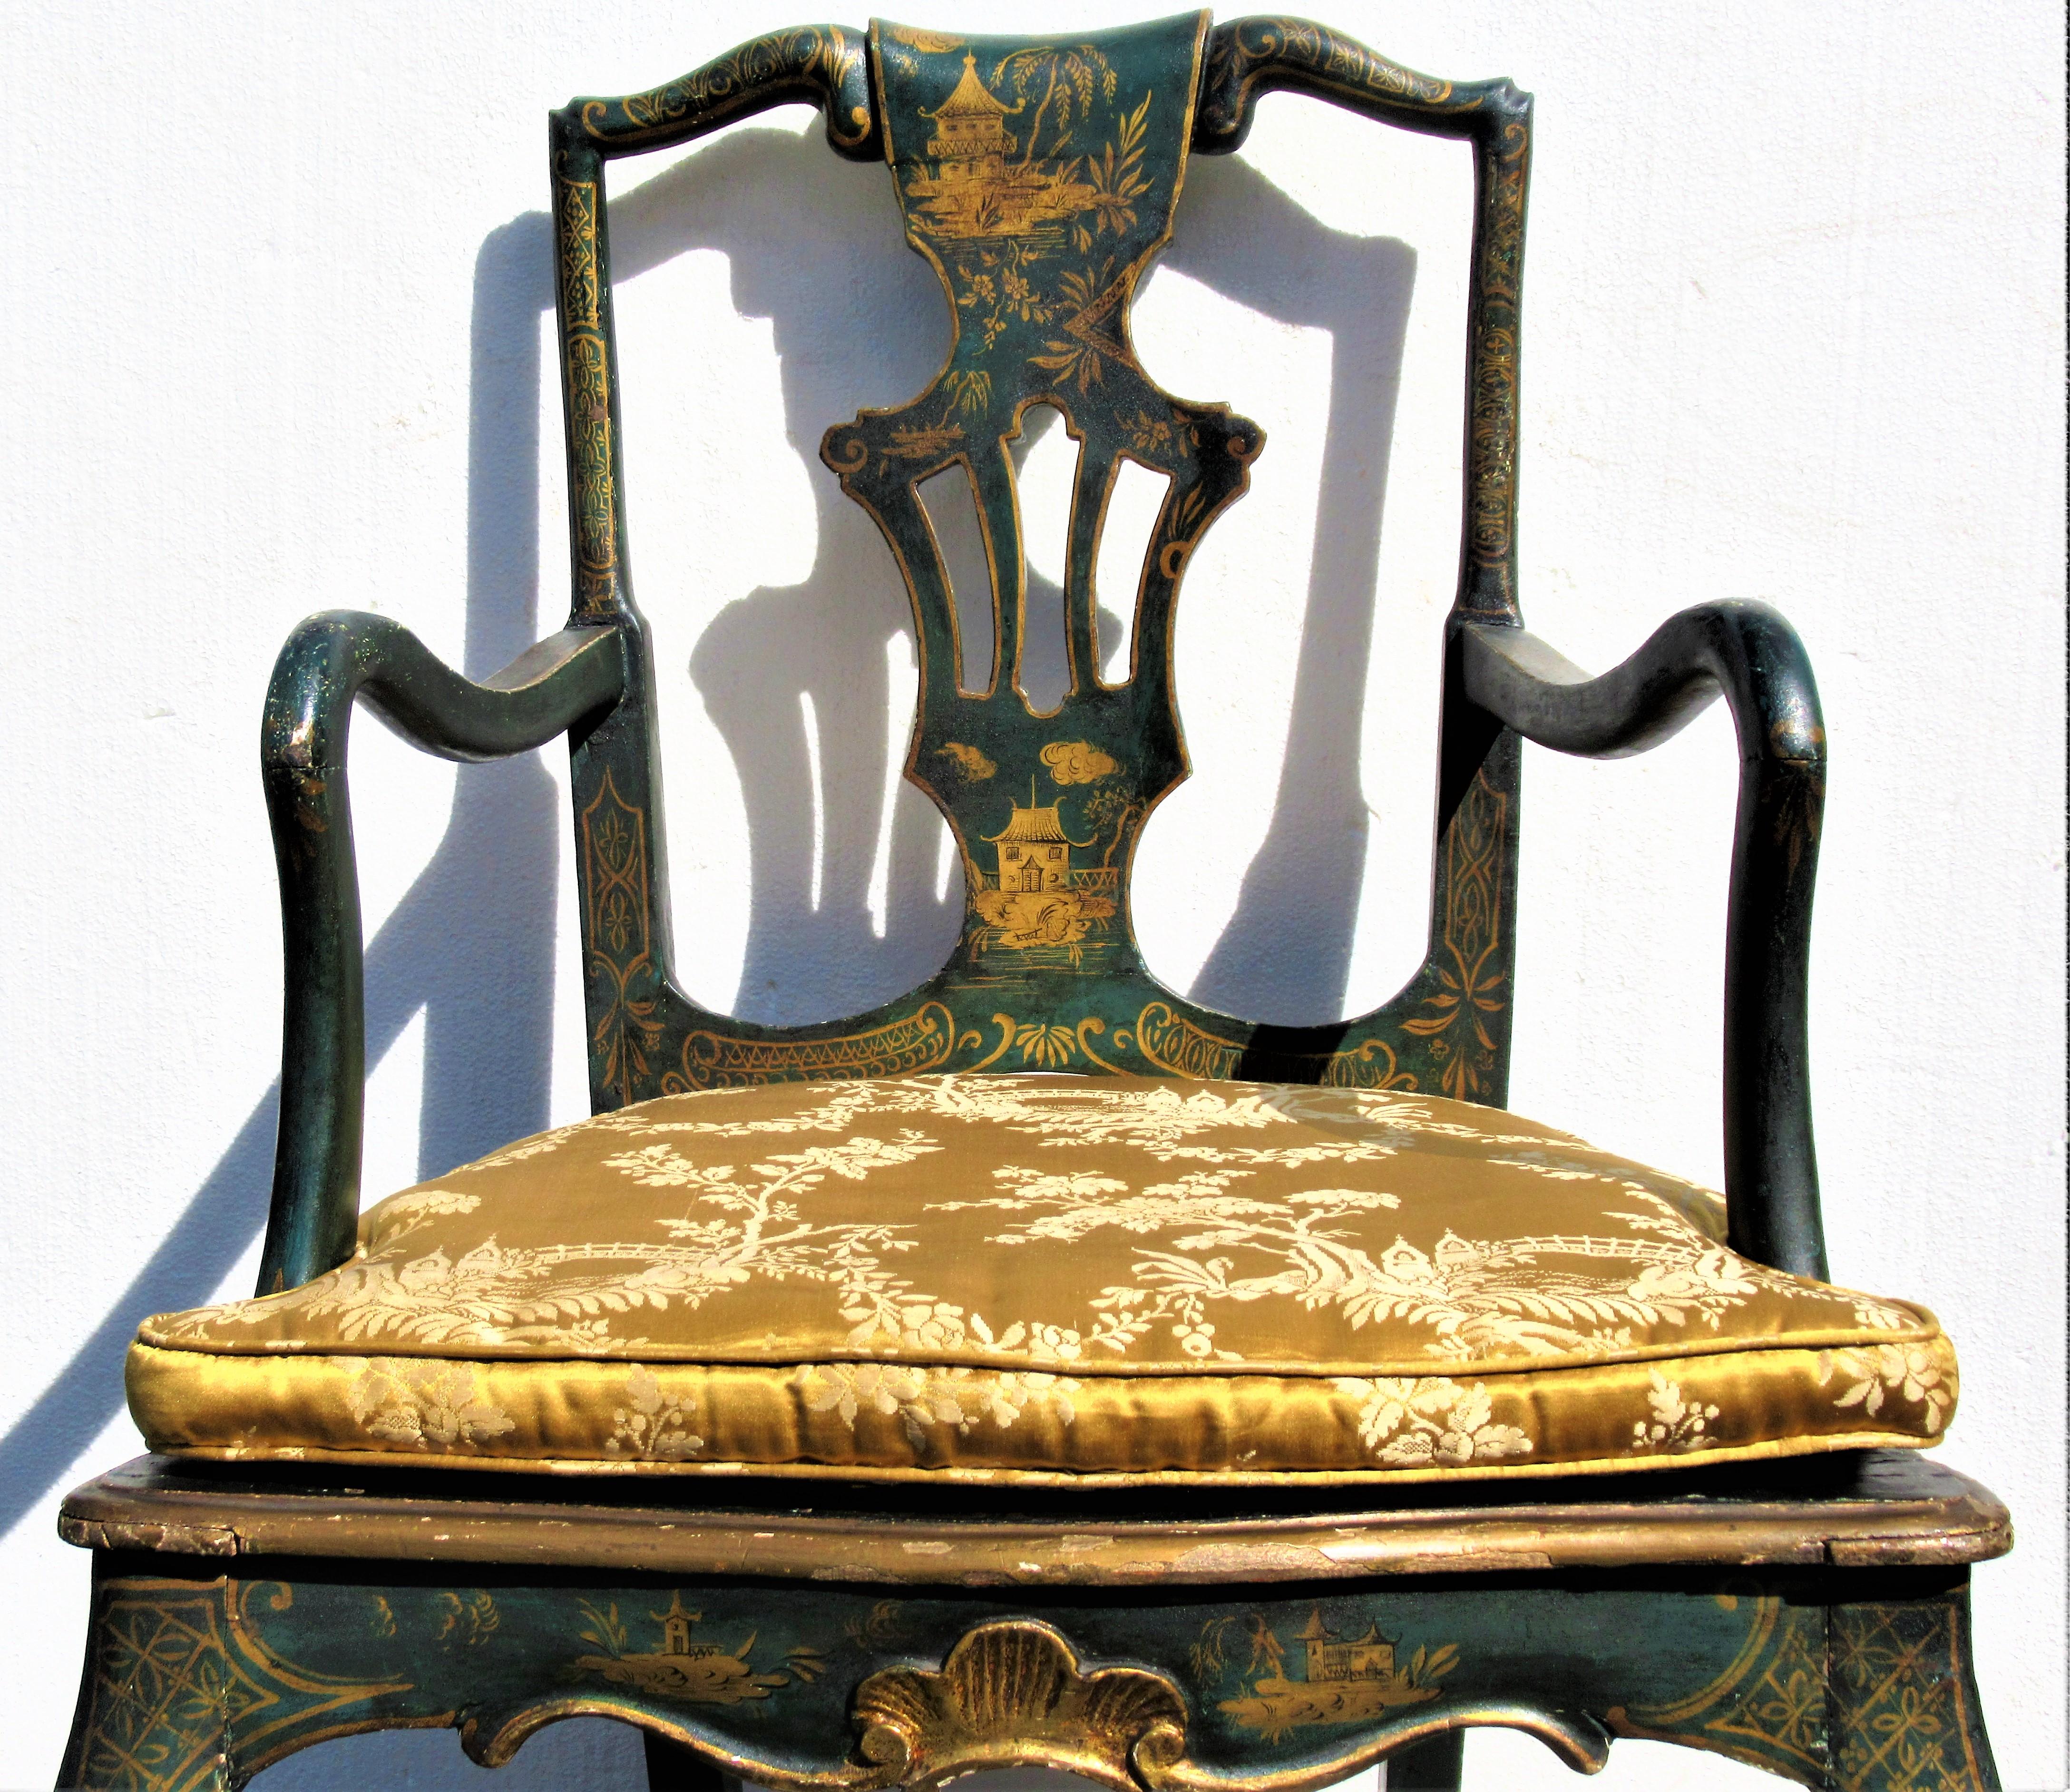 Antique Queen Ann style dark green japanned chinoiserie armchair with a beautifully carved sculptural quality and very fine all over gilded decoration. Most likely English in origin. Late 19th. century. Look at all pictures and read condition report